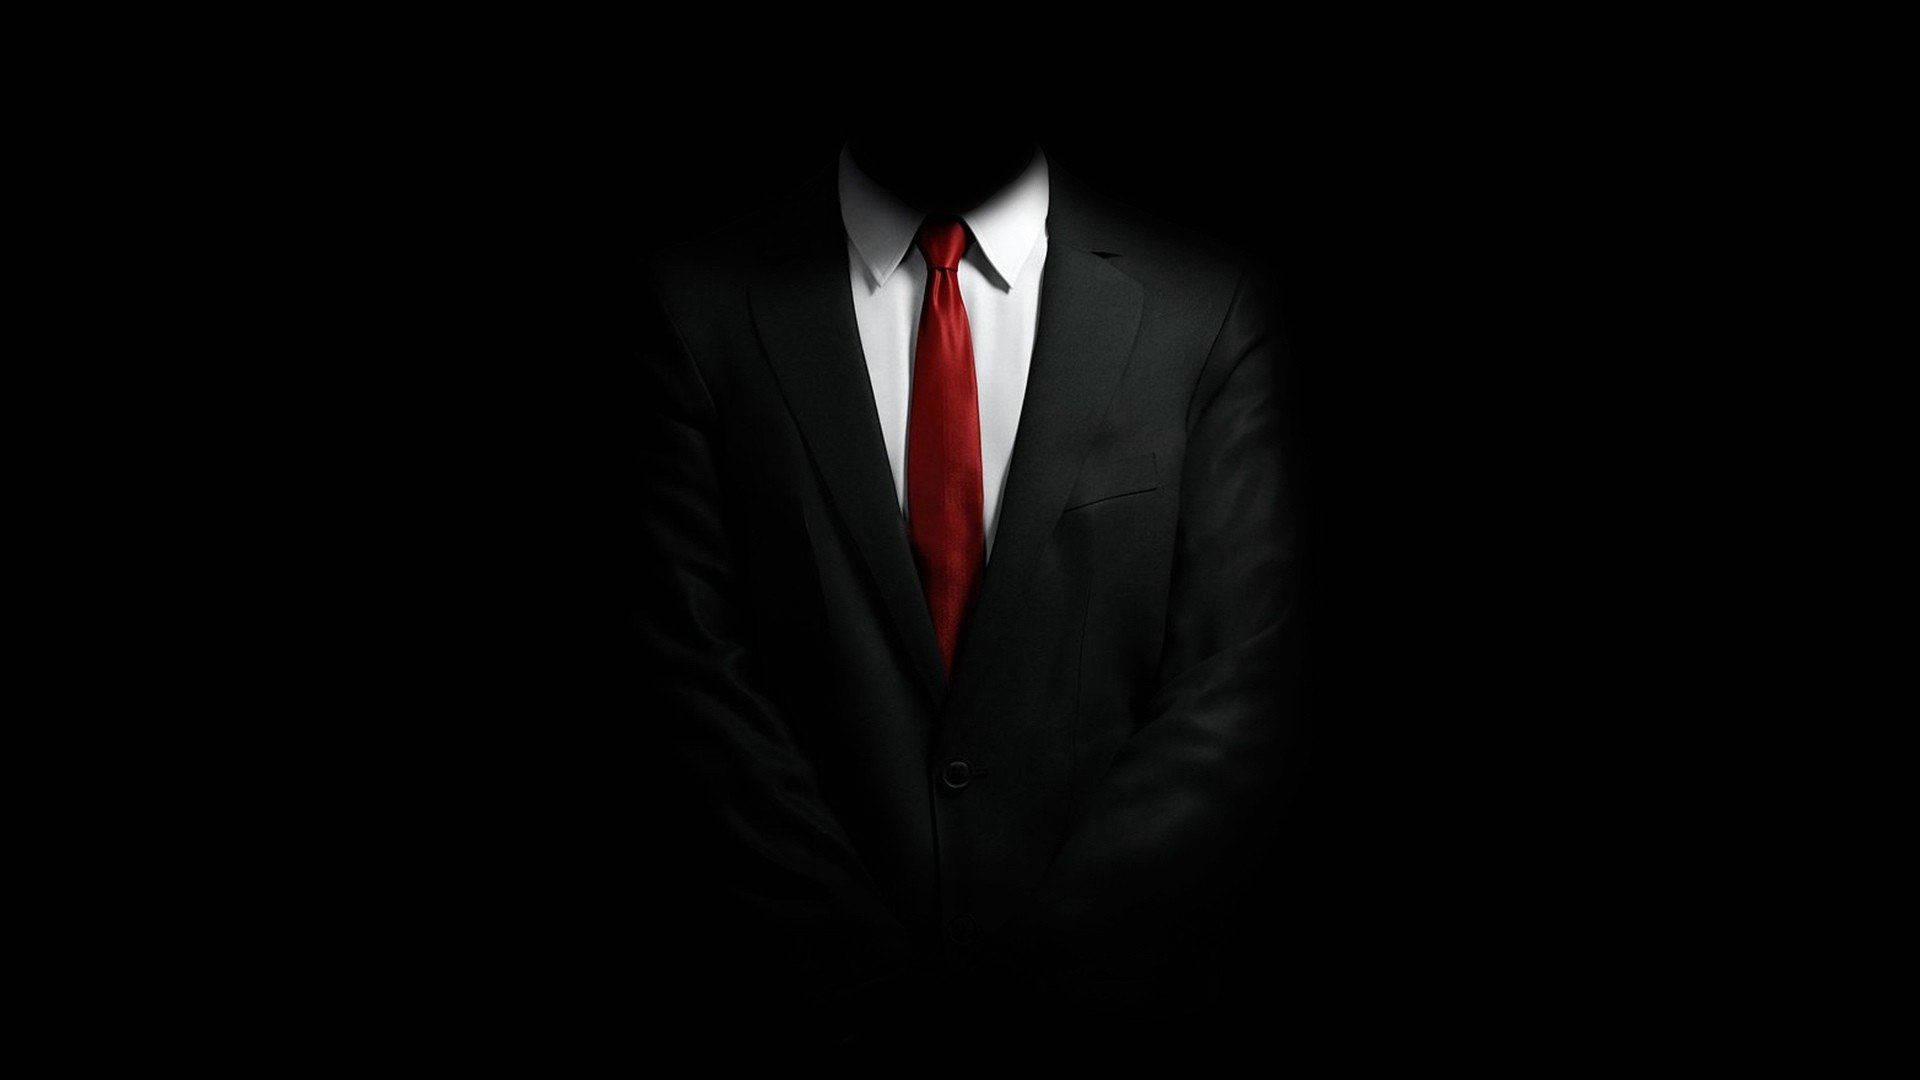 A Man In A Suit And Tie Is Standing In The Dark Wallpaper